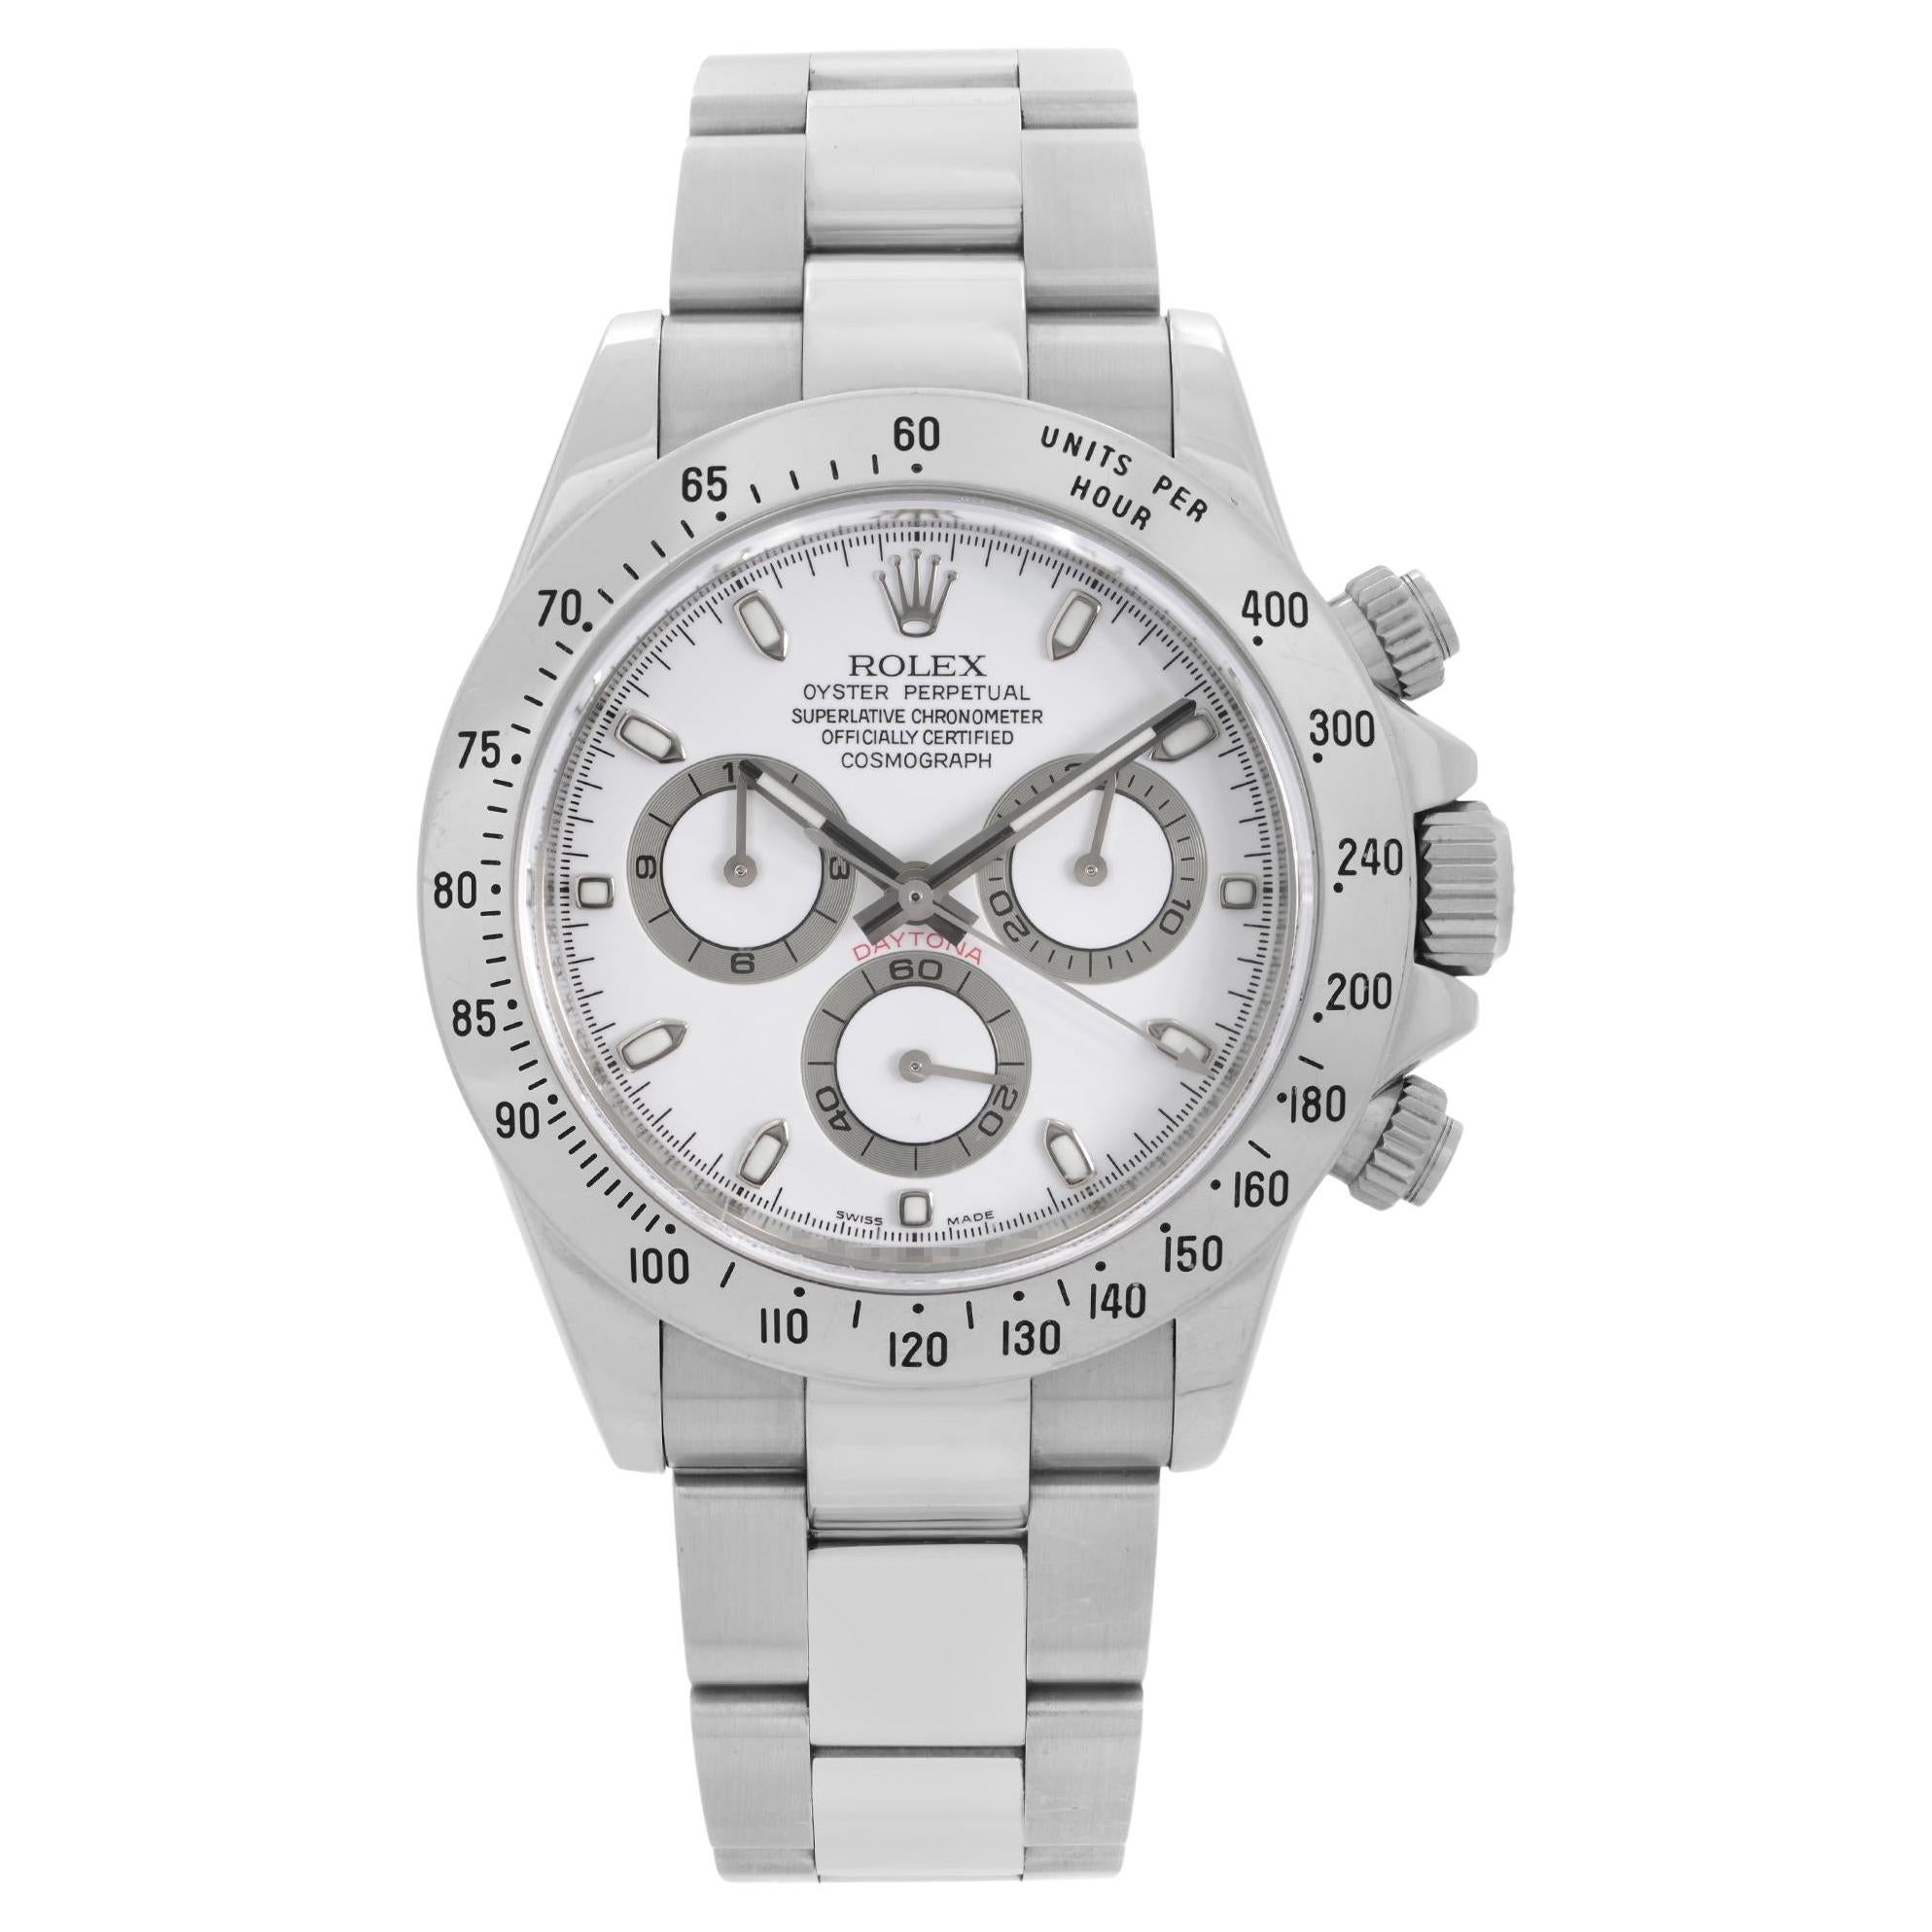 Rolex Daytona Cosmograph Stainless Steel White Dial Automatic Men Watch 116520 For Sale